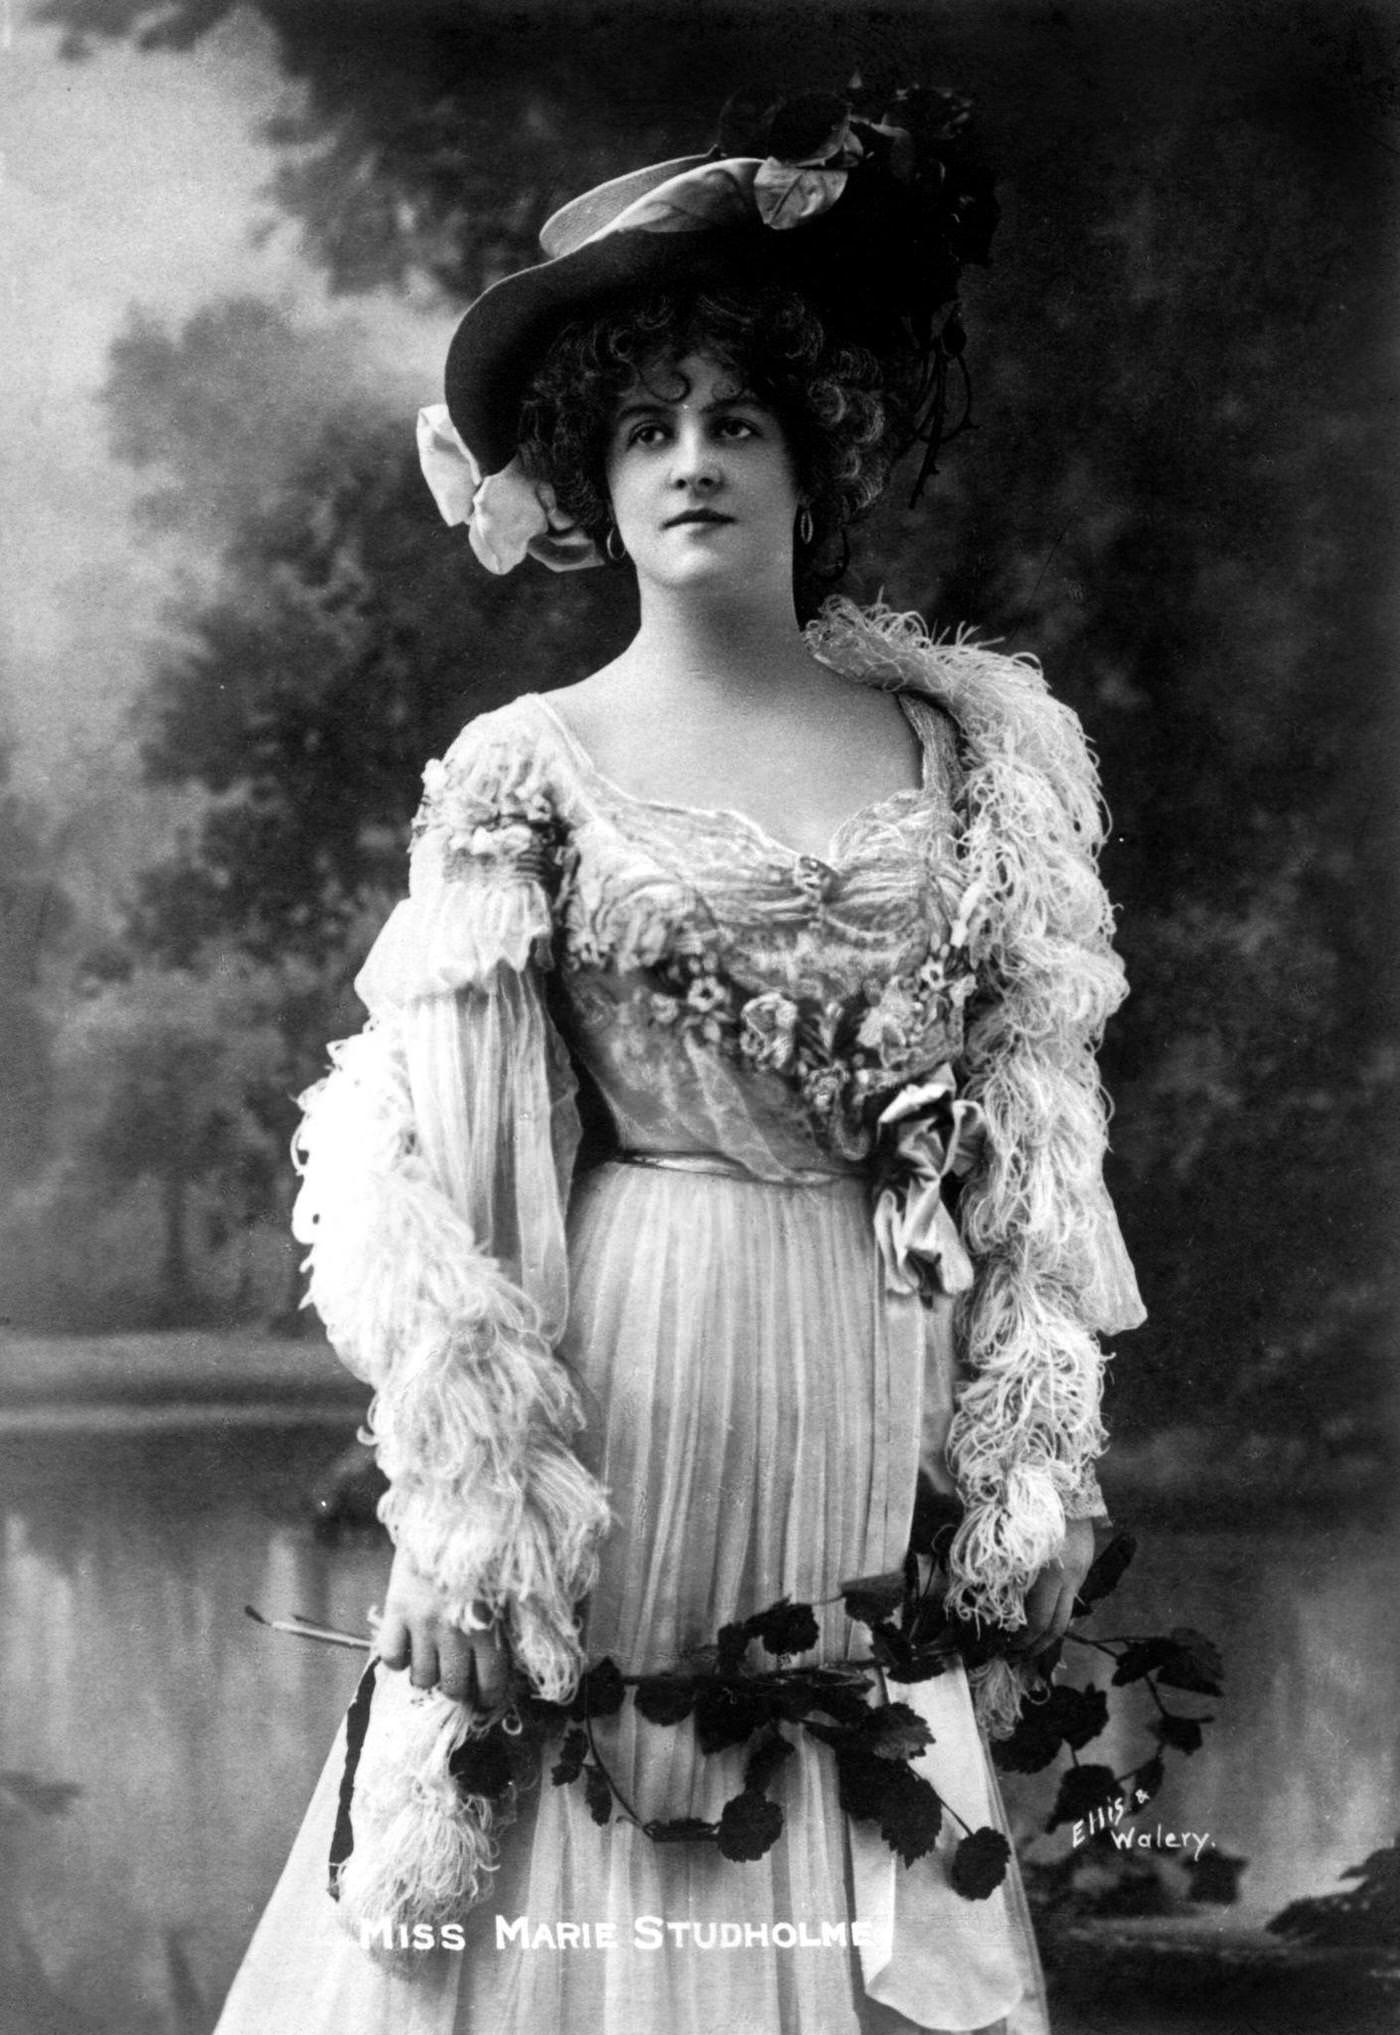 Marie Studholme looks stunning in this portrait from the early 1900s